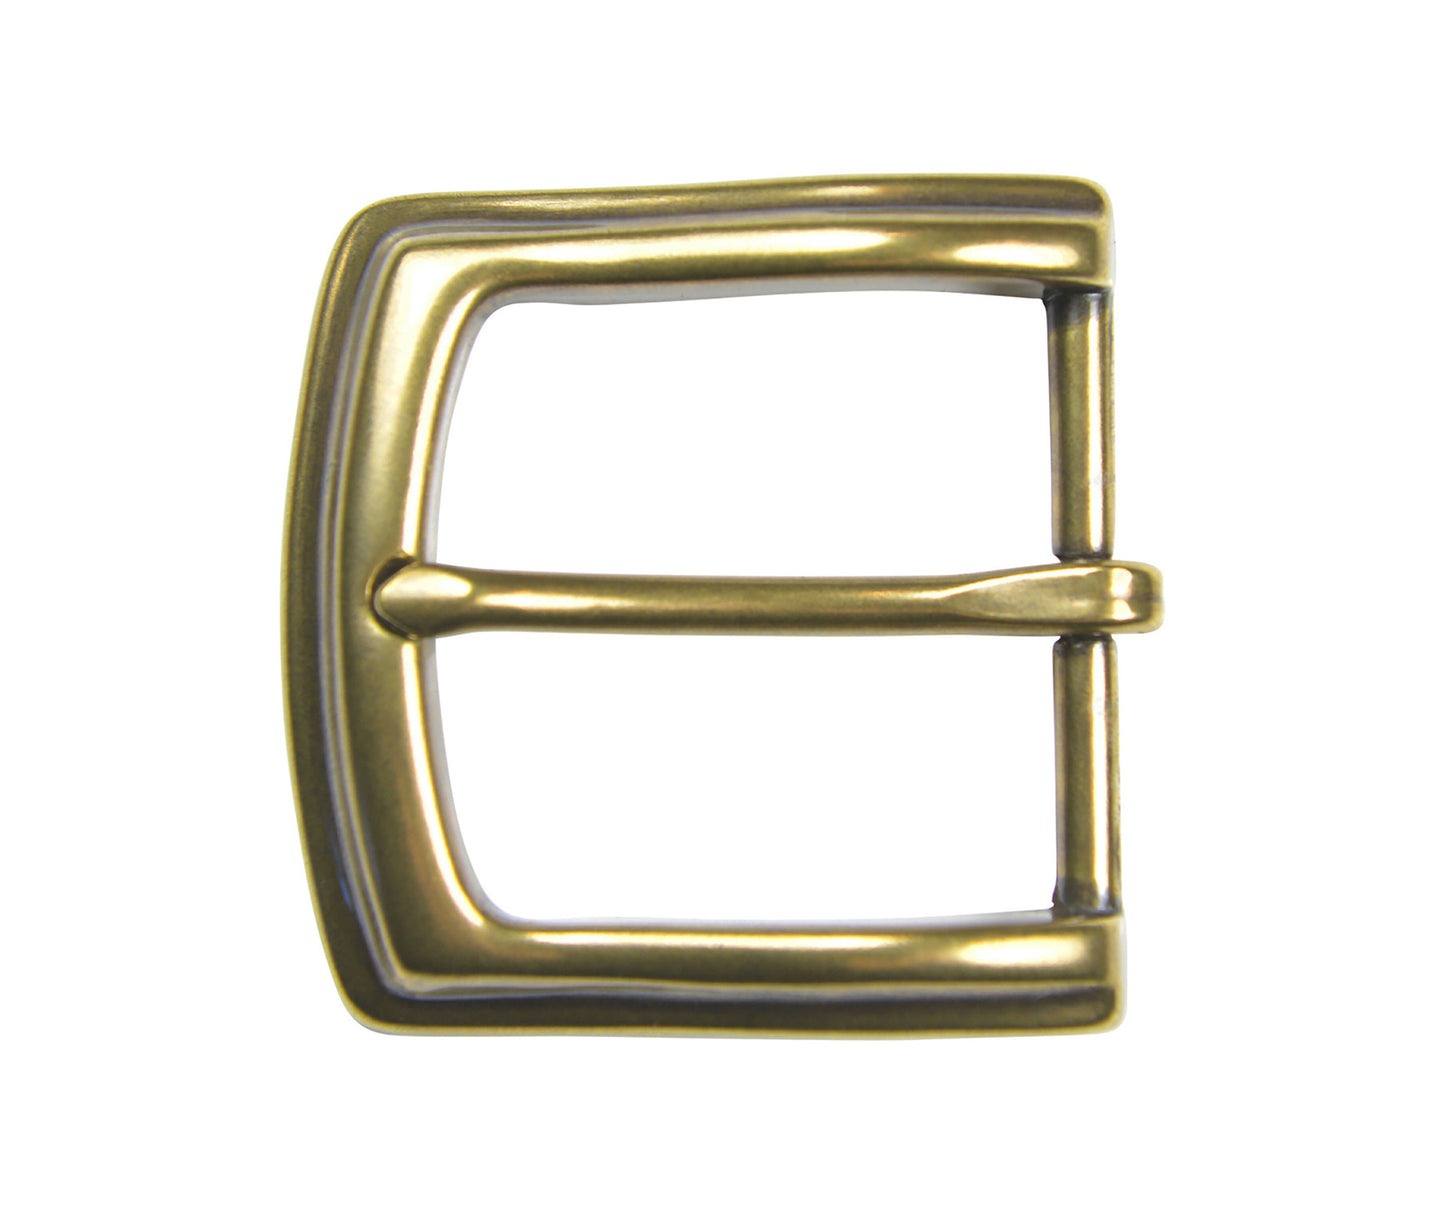 TBS-P3926 - Brass Pin Buckle for 1.5" or 38mm Belts